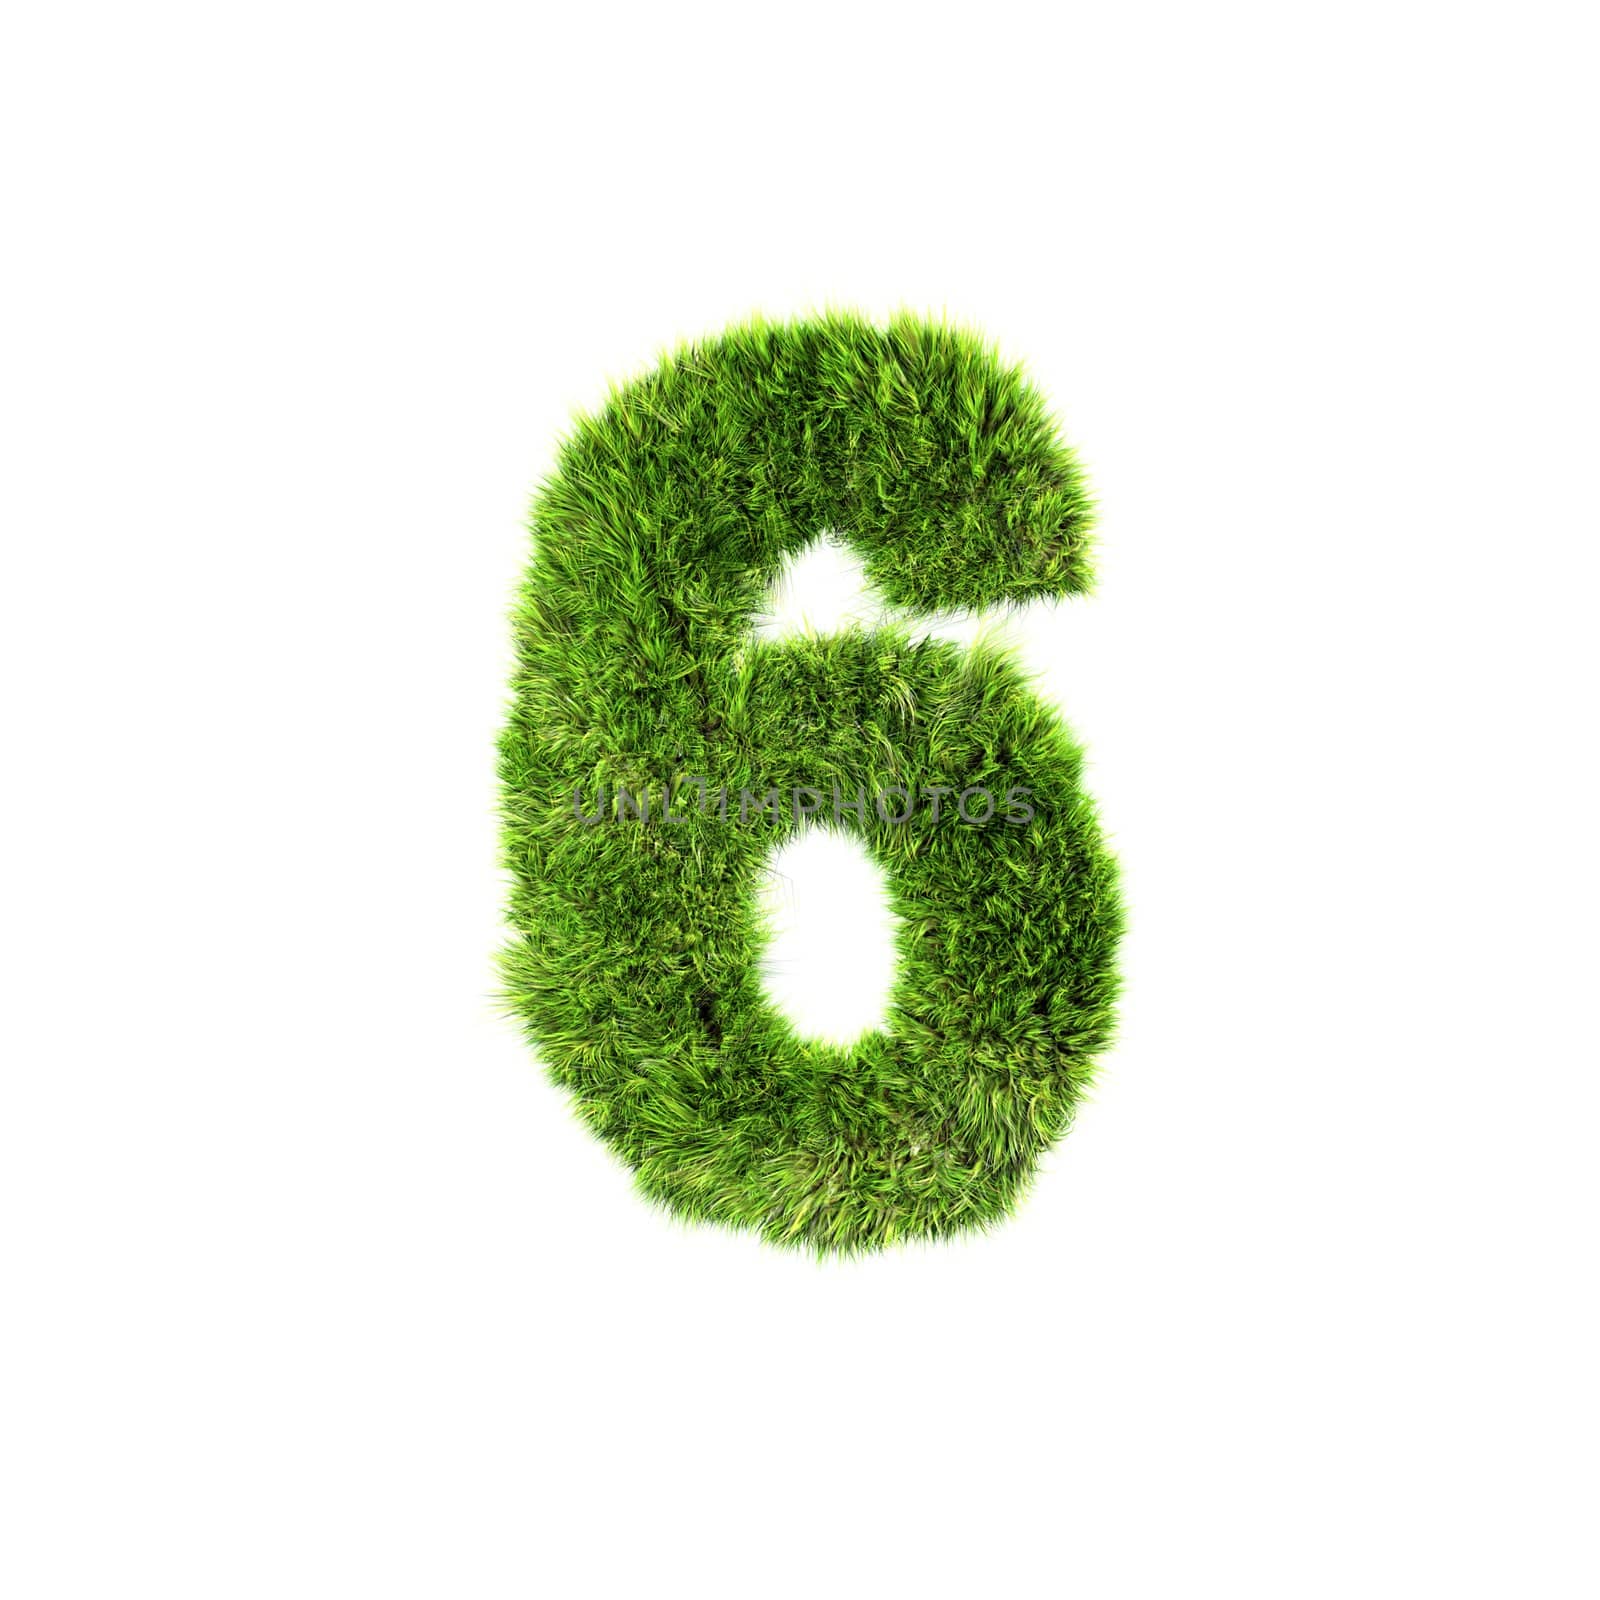 3d grass digit isolated on a white background - 6 by chrisroll